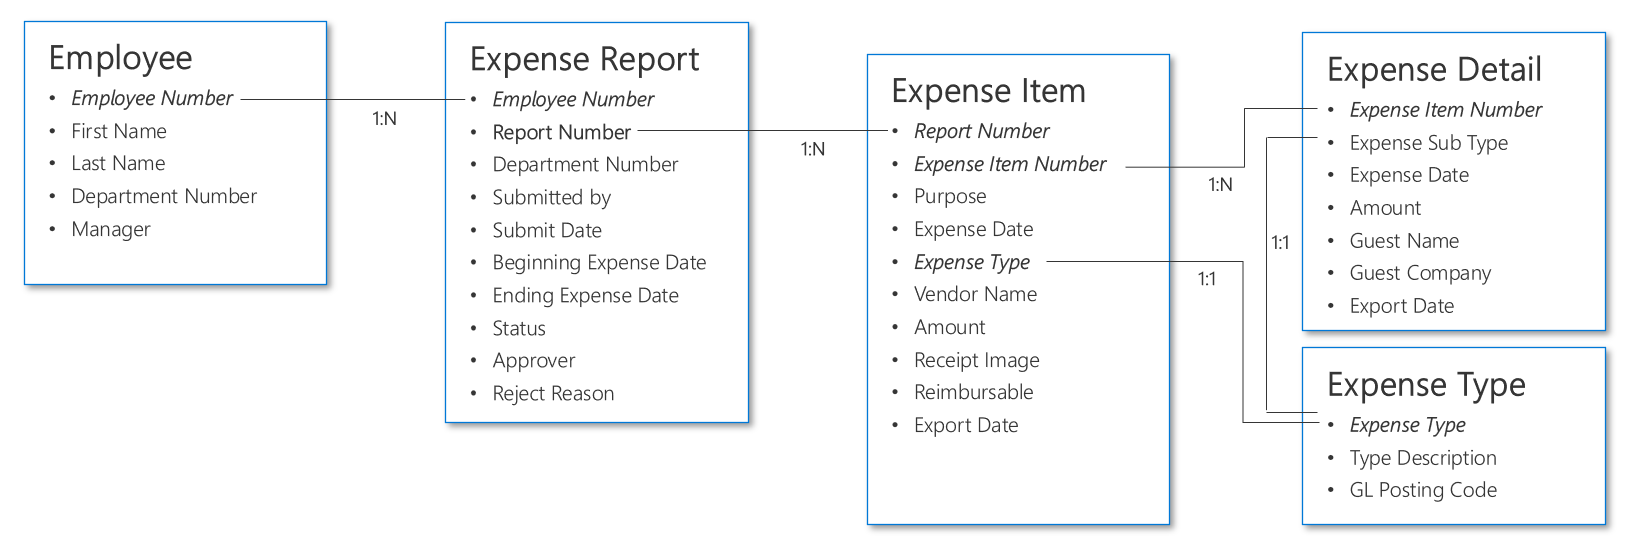 Example expense reporting data structure.